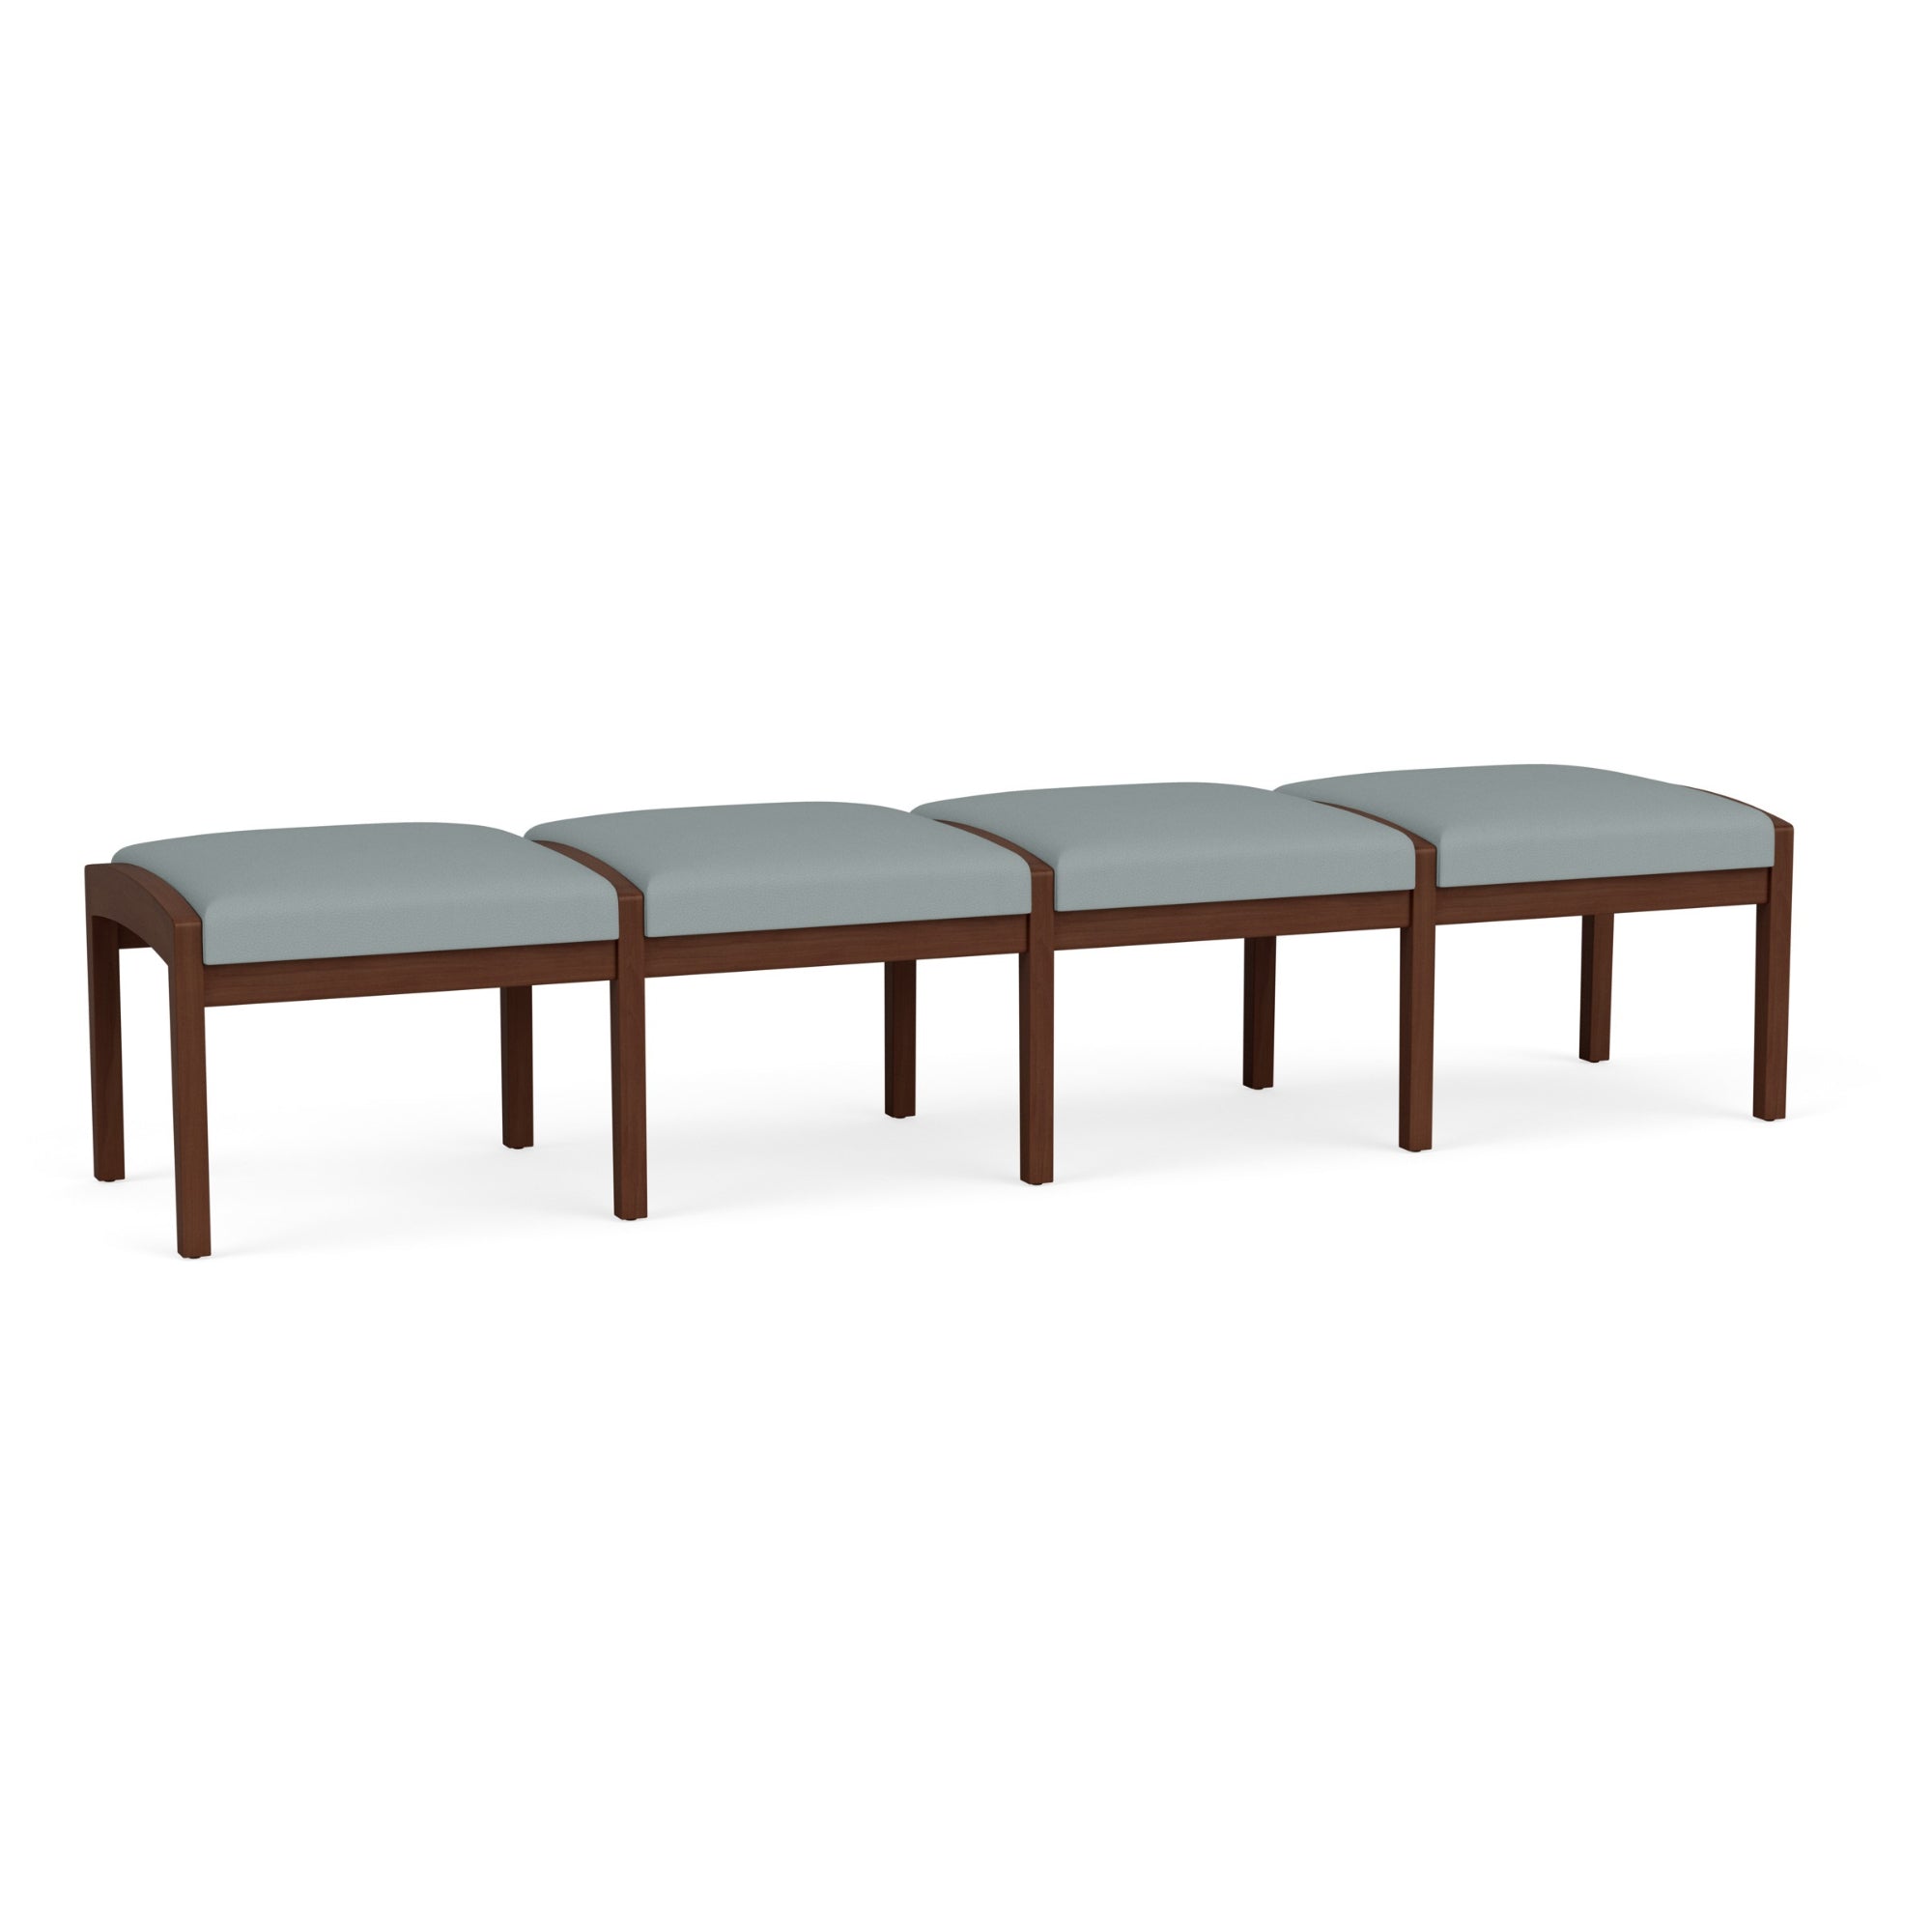 Lenox Wood Collection Reception Seating, 4 Seat Bench, Designer Fabric Upholstery, FREE SHIPPING